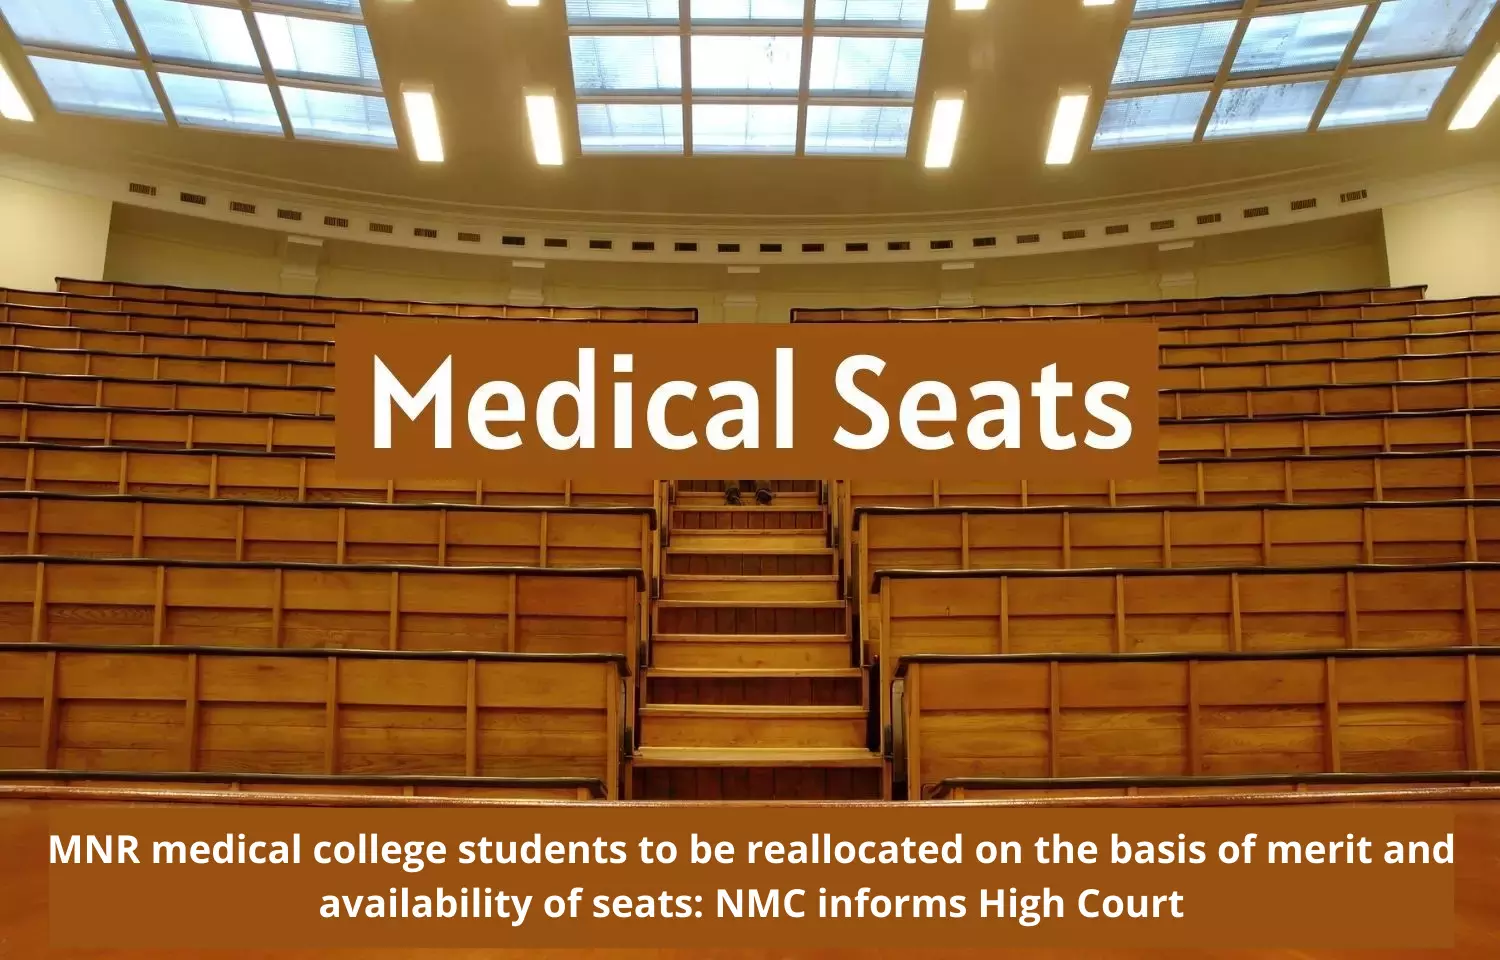 MNR medical college students to be reallocated on basis of merit, availability of seats: NMC informs High Court